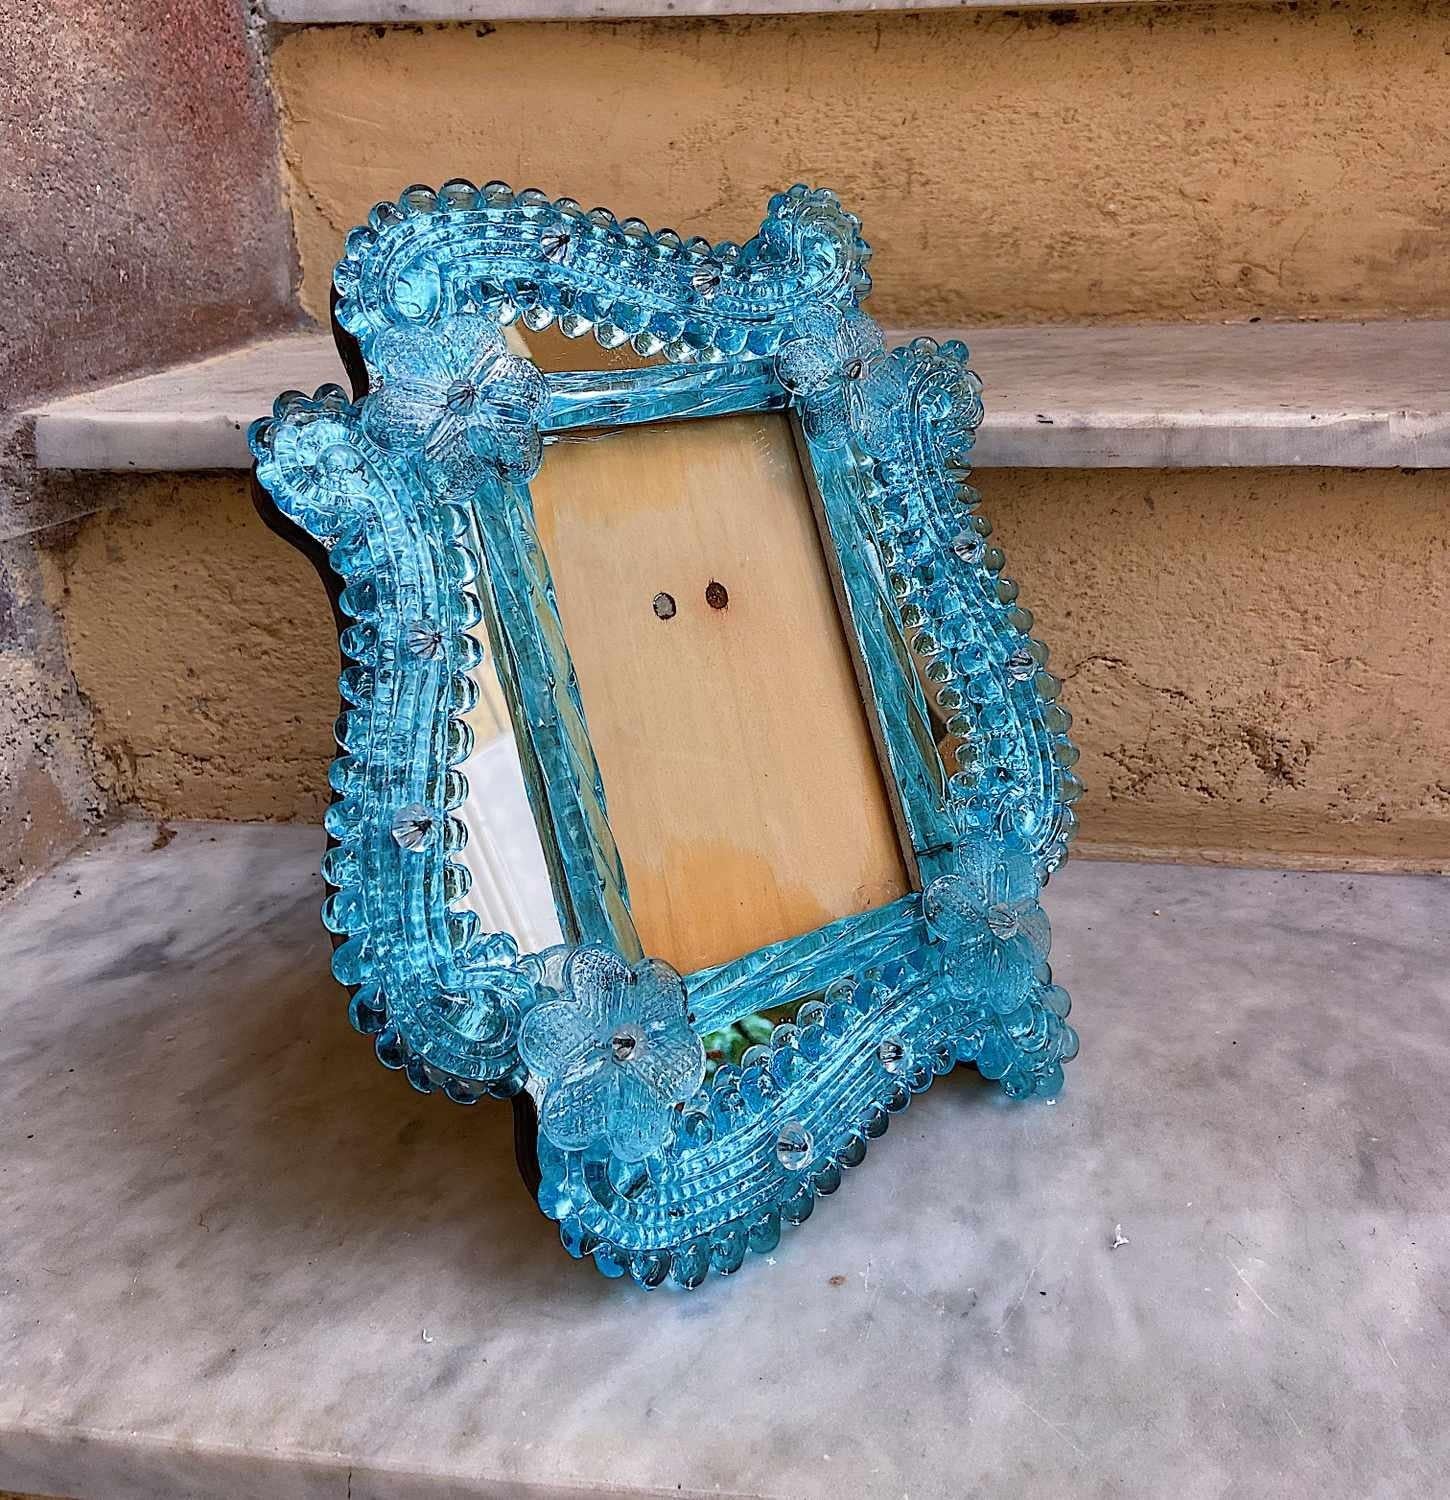 Stunning vintage Venetian Murano glass photo frame. Can also be hung on wall. Set on a wood base. Beautiful ice blue coloured glass.